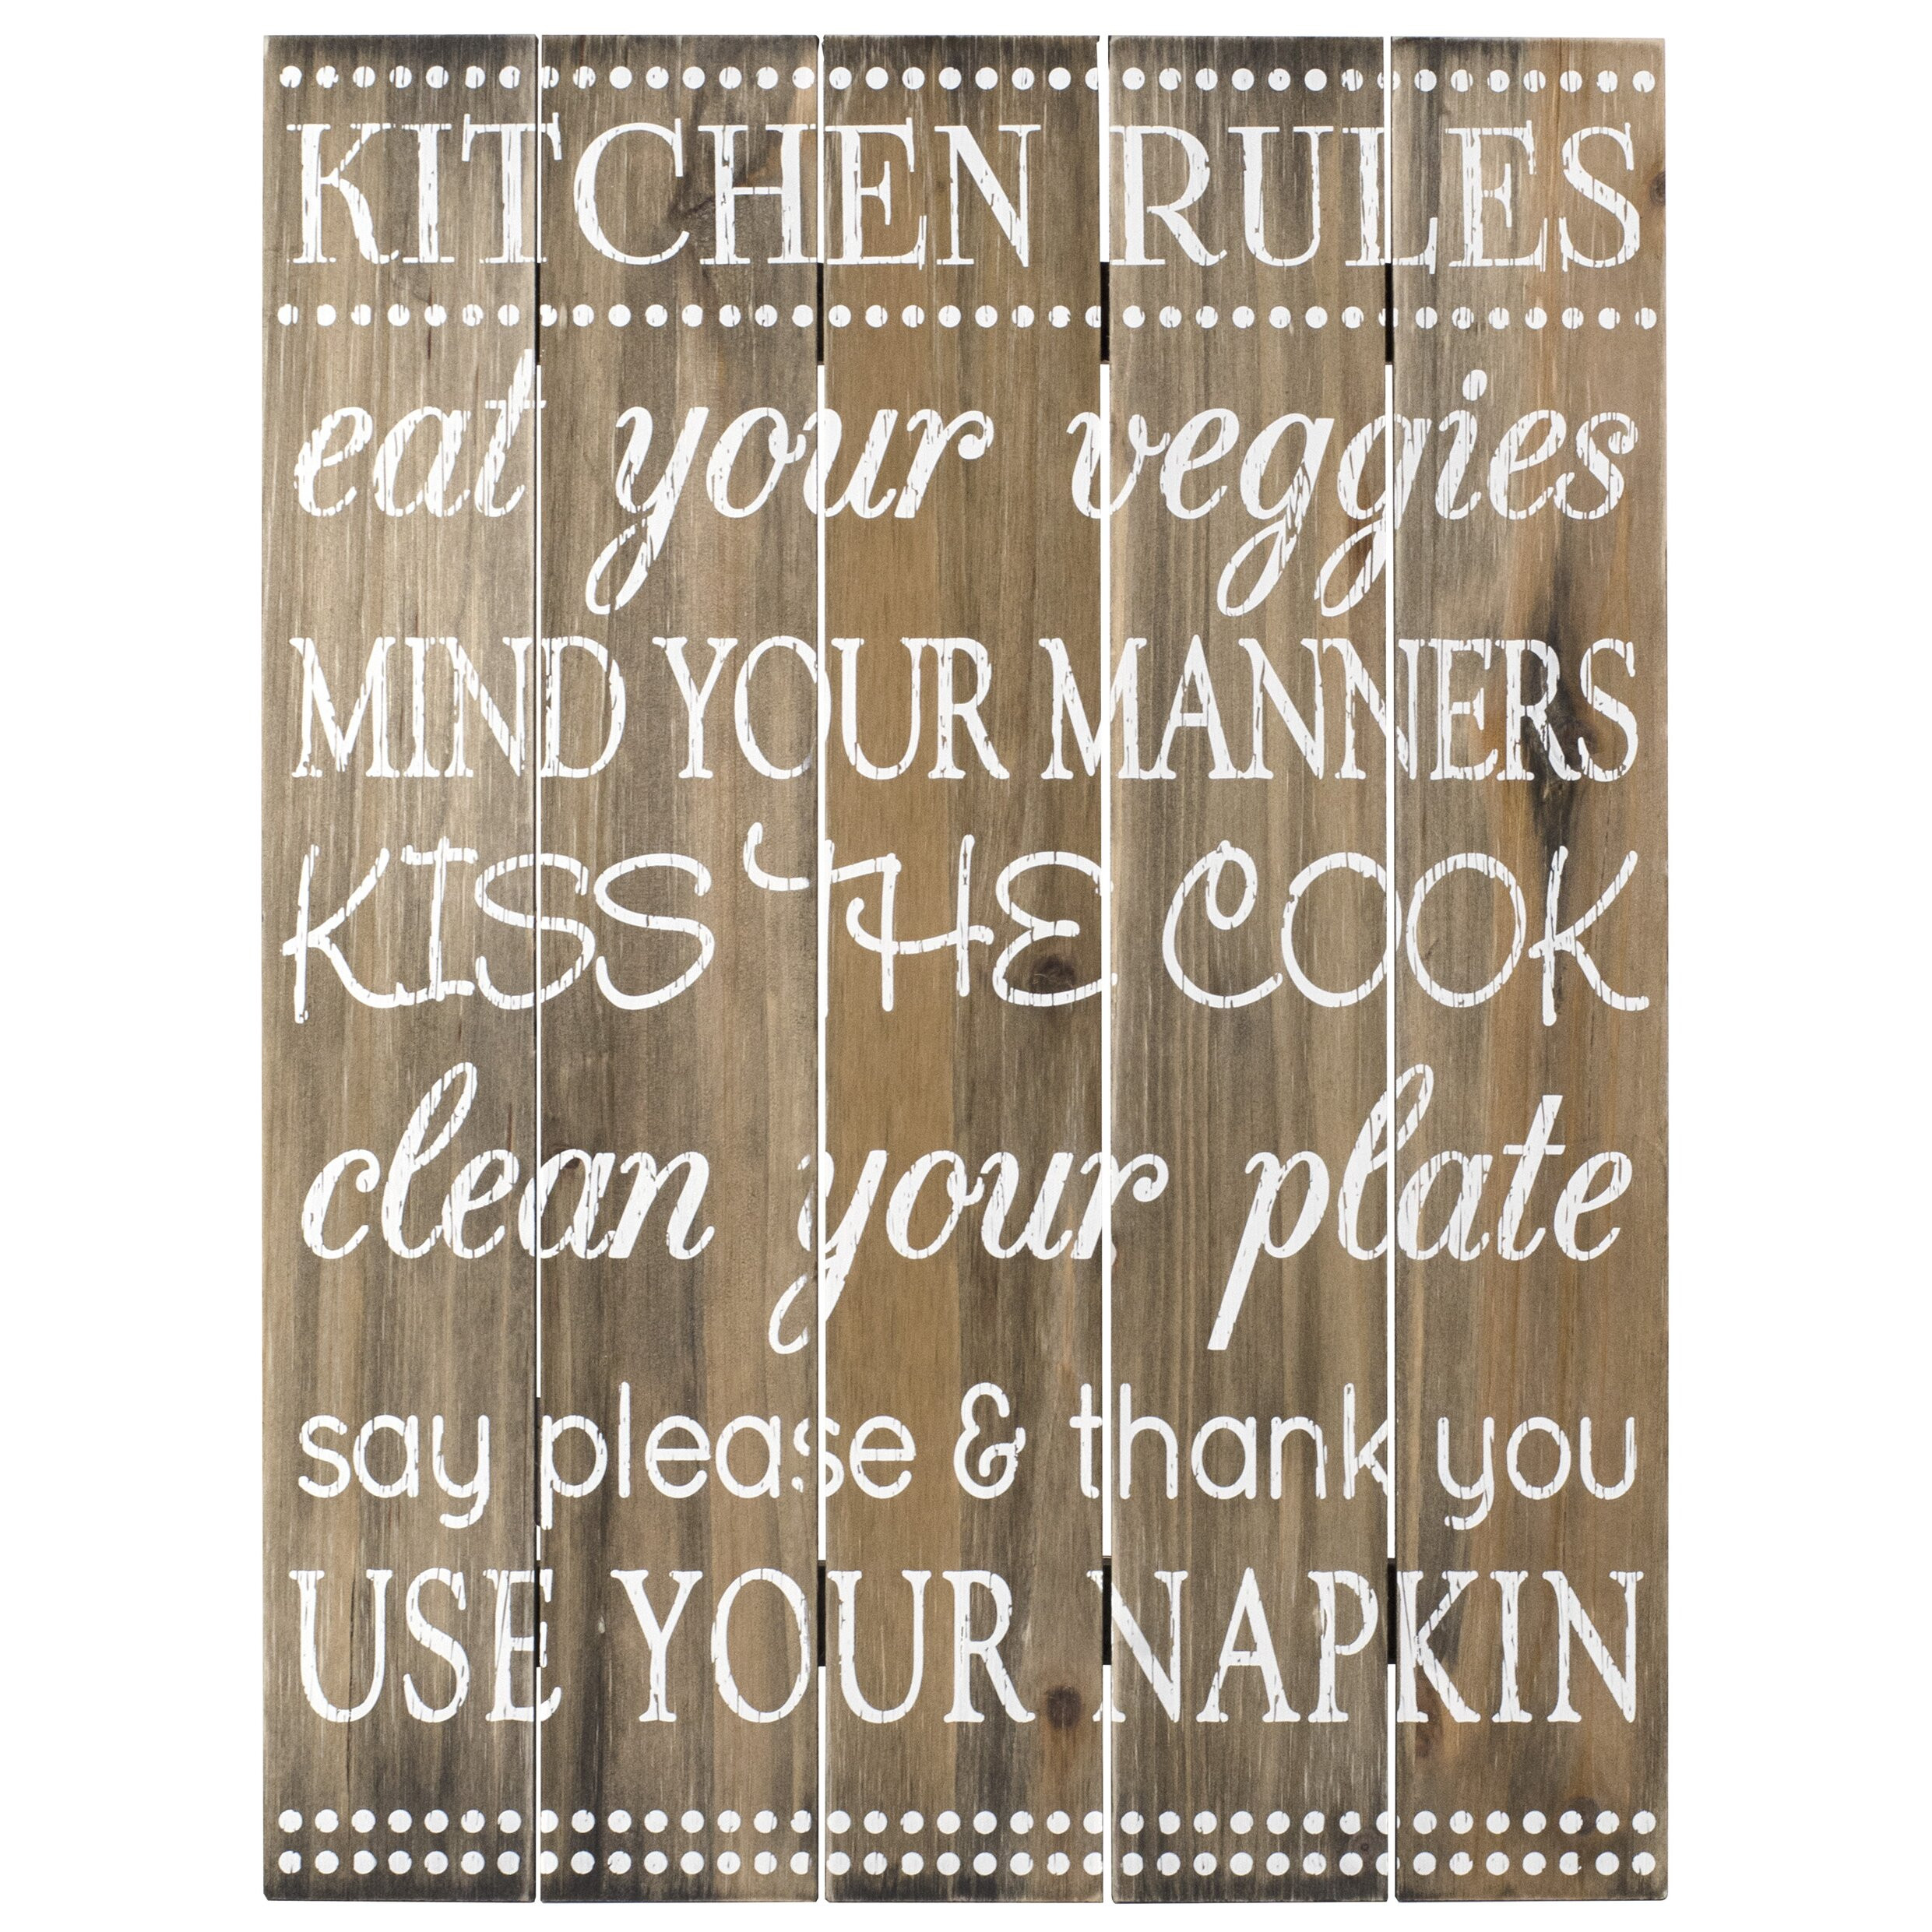 Kitchen Rules Wall Decor
 Kitchen Rules Sign Wall Decor